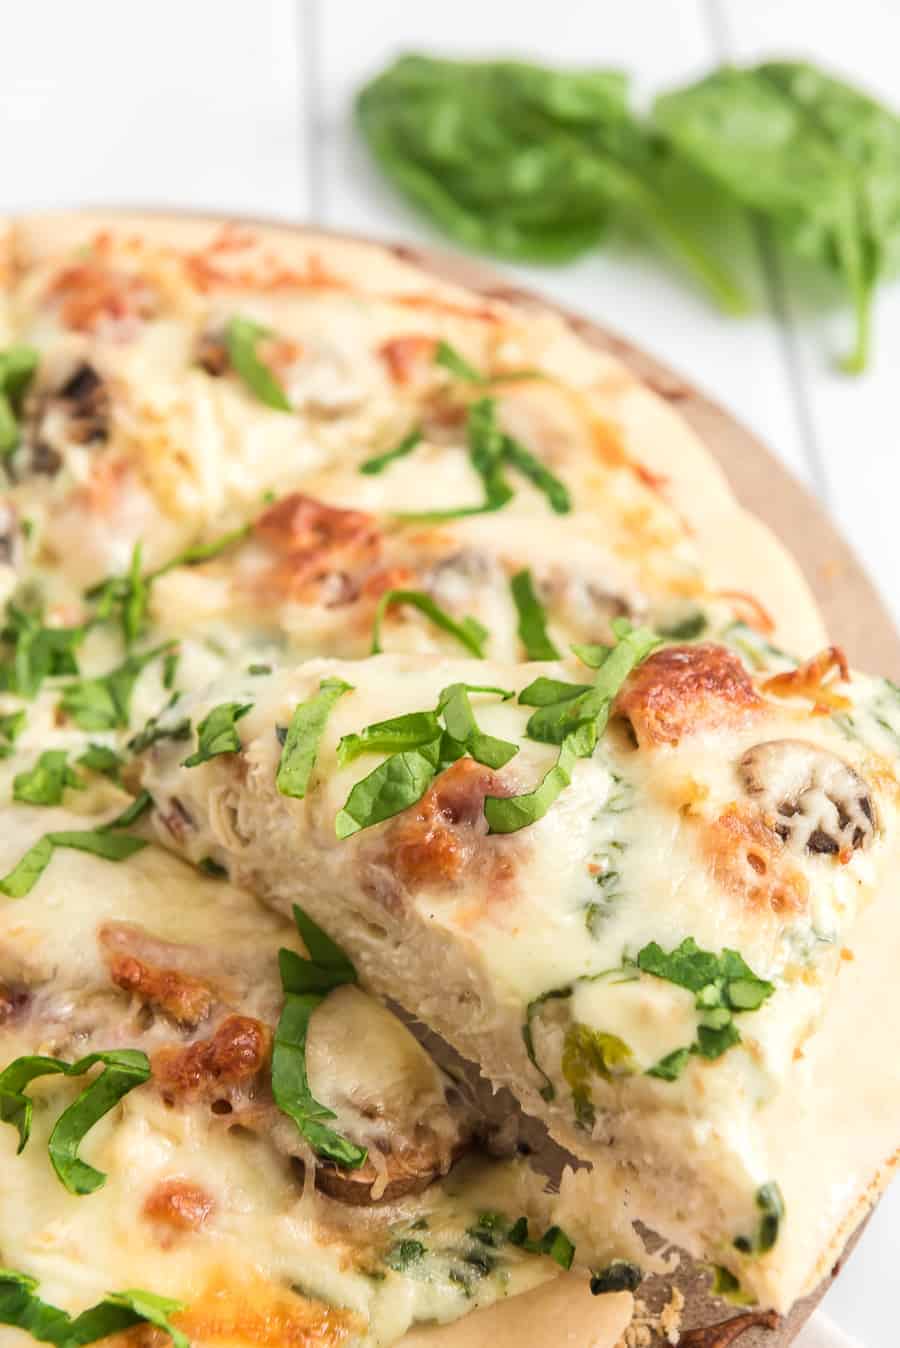 Chicken Bacon Mushroom Pizza with Creamy Spinach Sauce